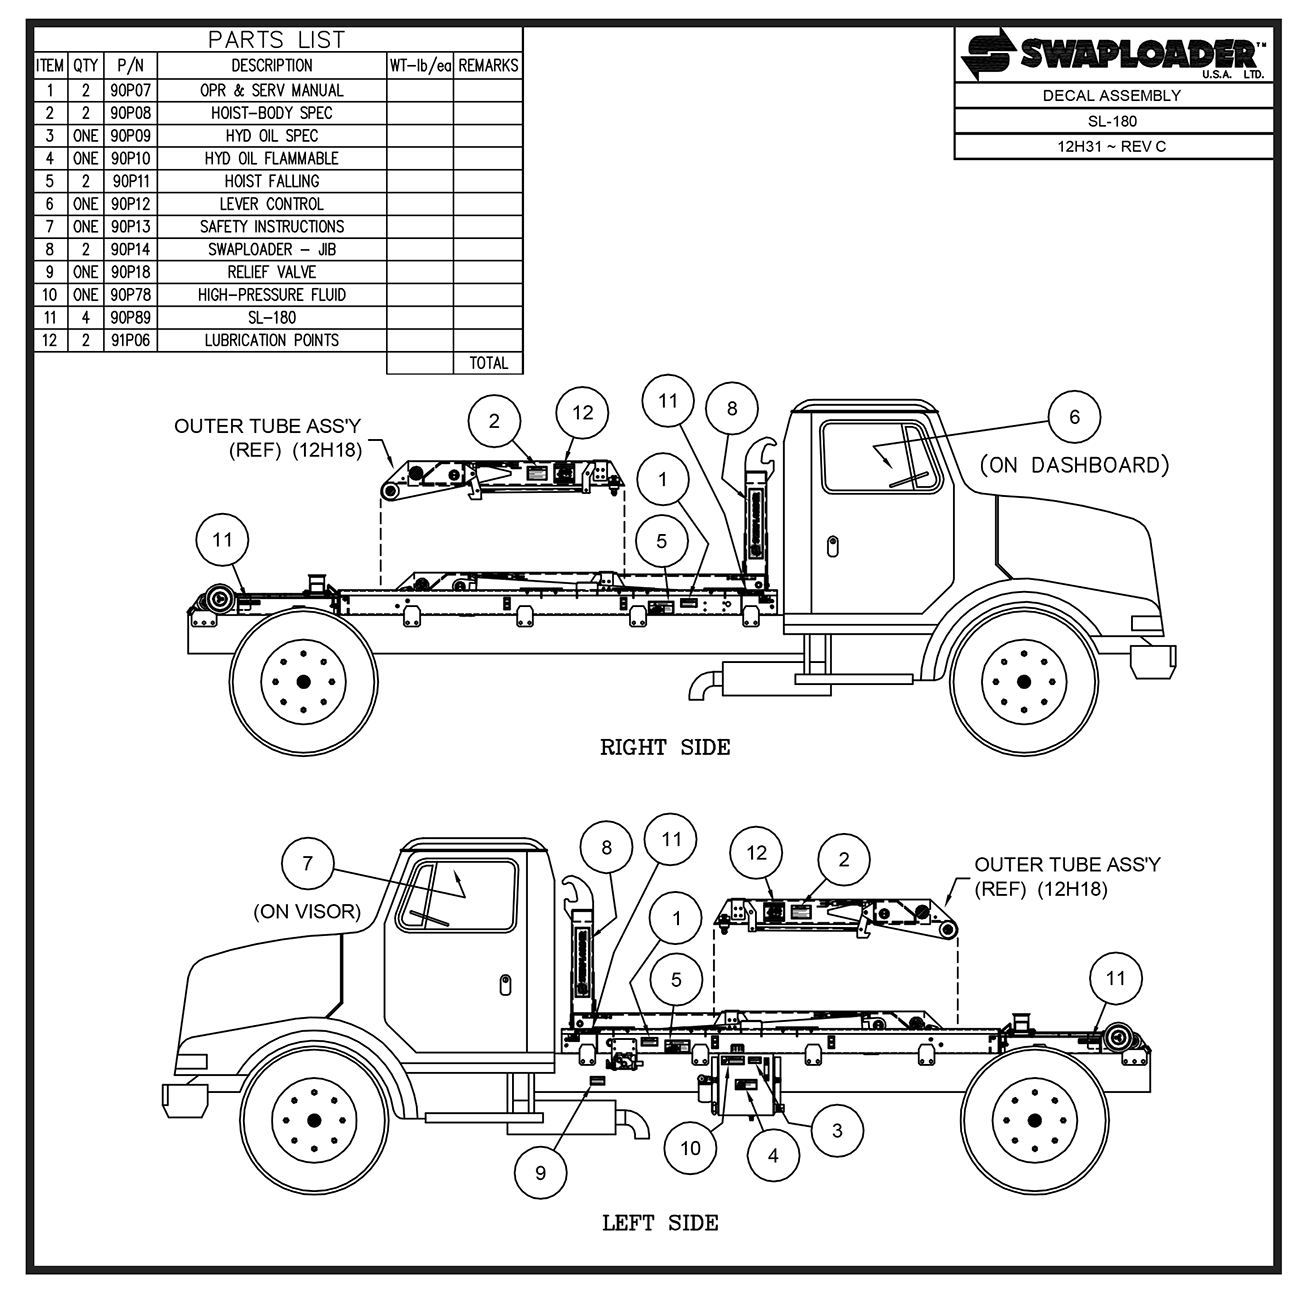 Swaploader SL-180 Decal Assembly Diagram